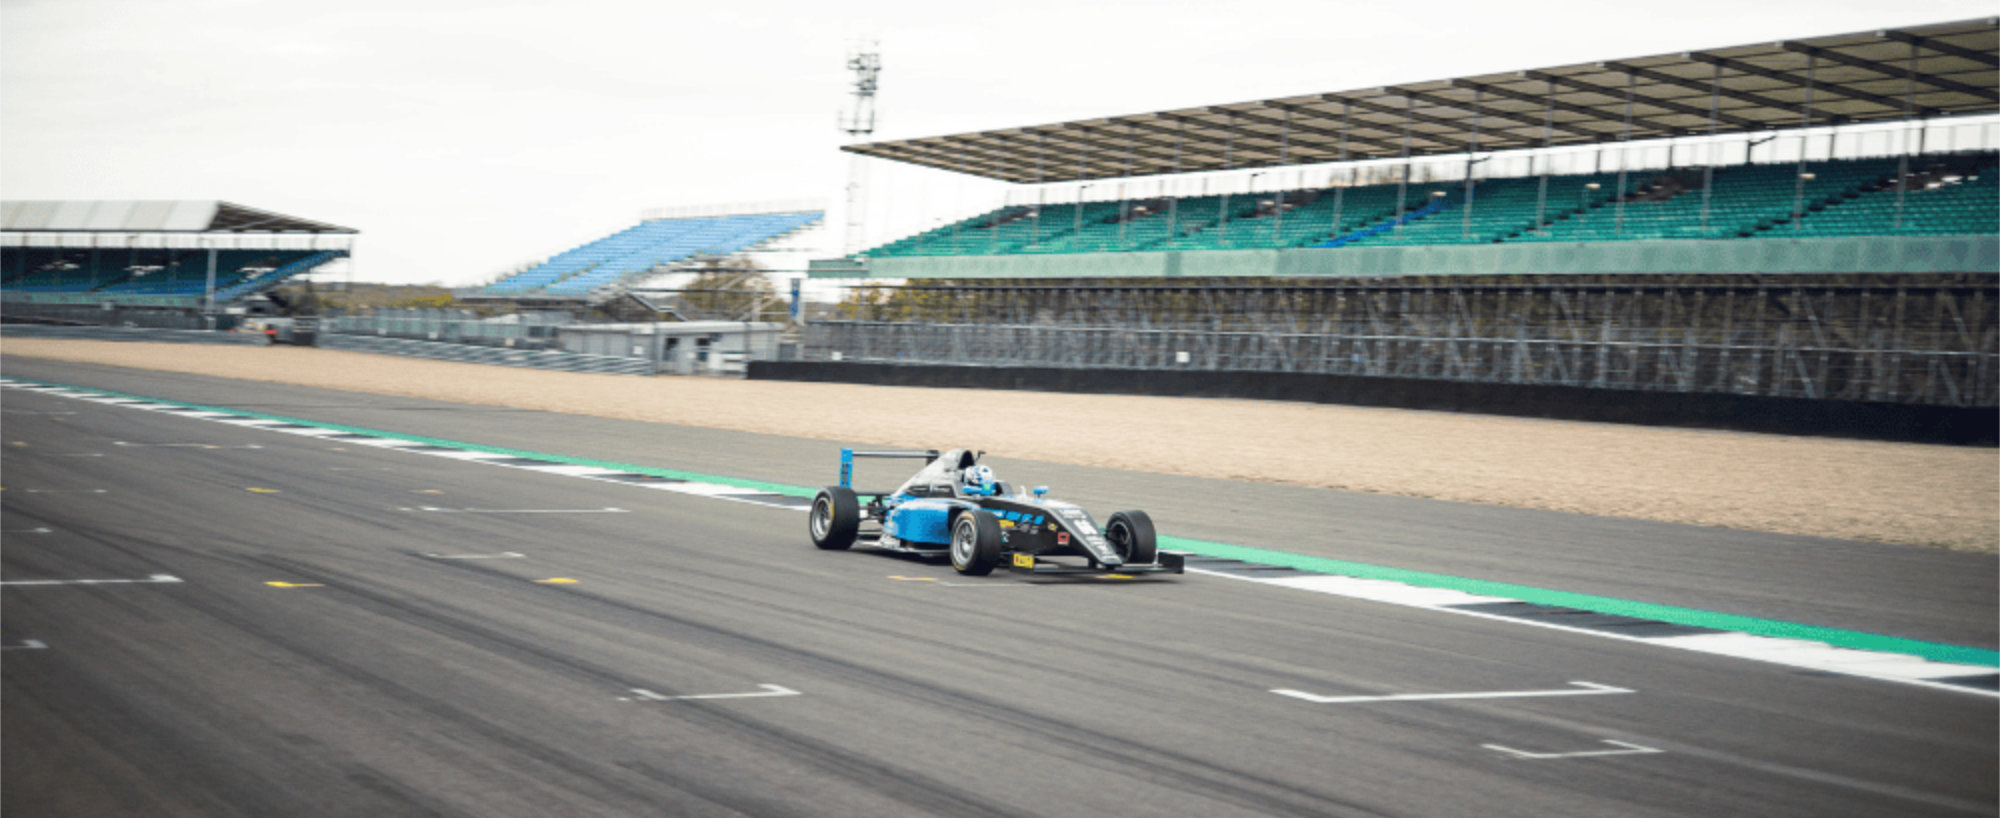 Chloe Grant on track at Silverstone in a GB4 car, driving towards the camera at speed on the National Pits Straight